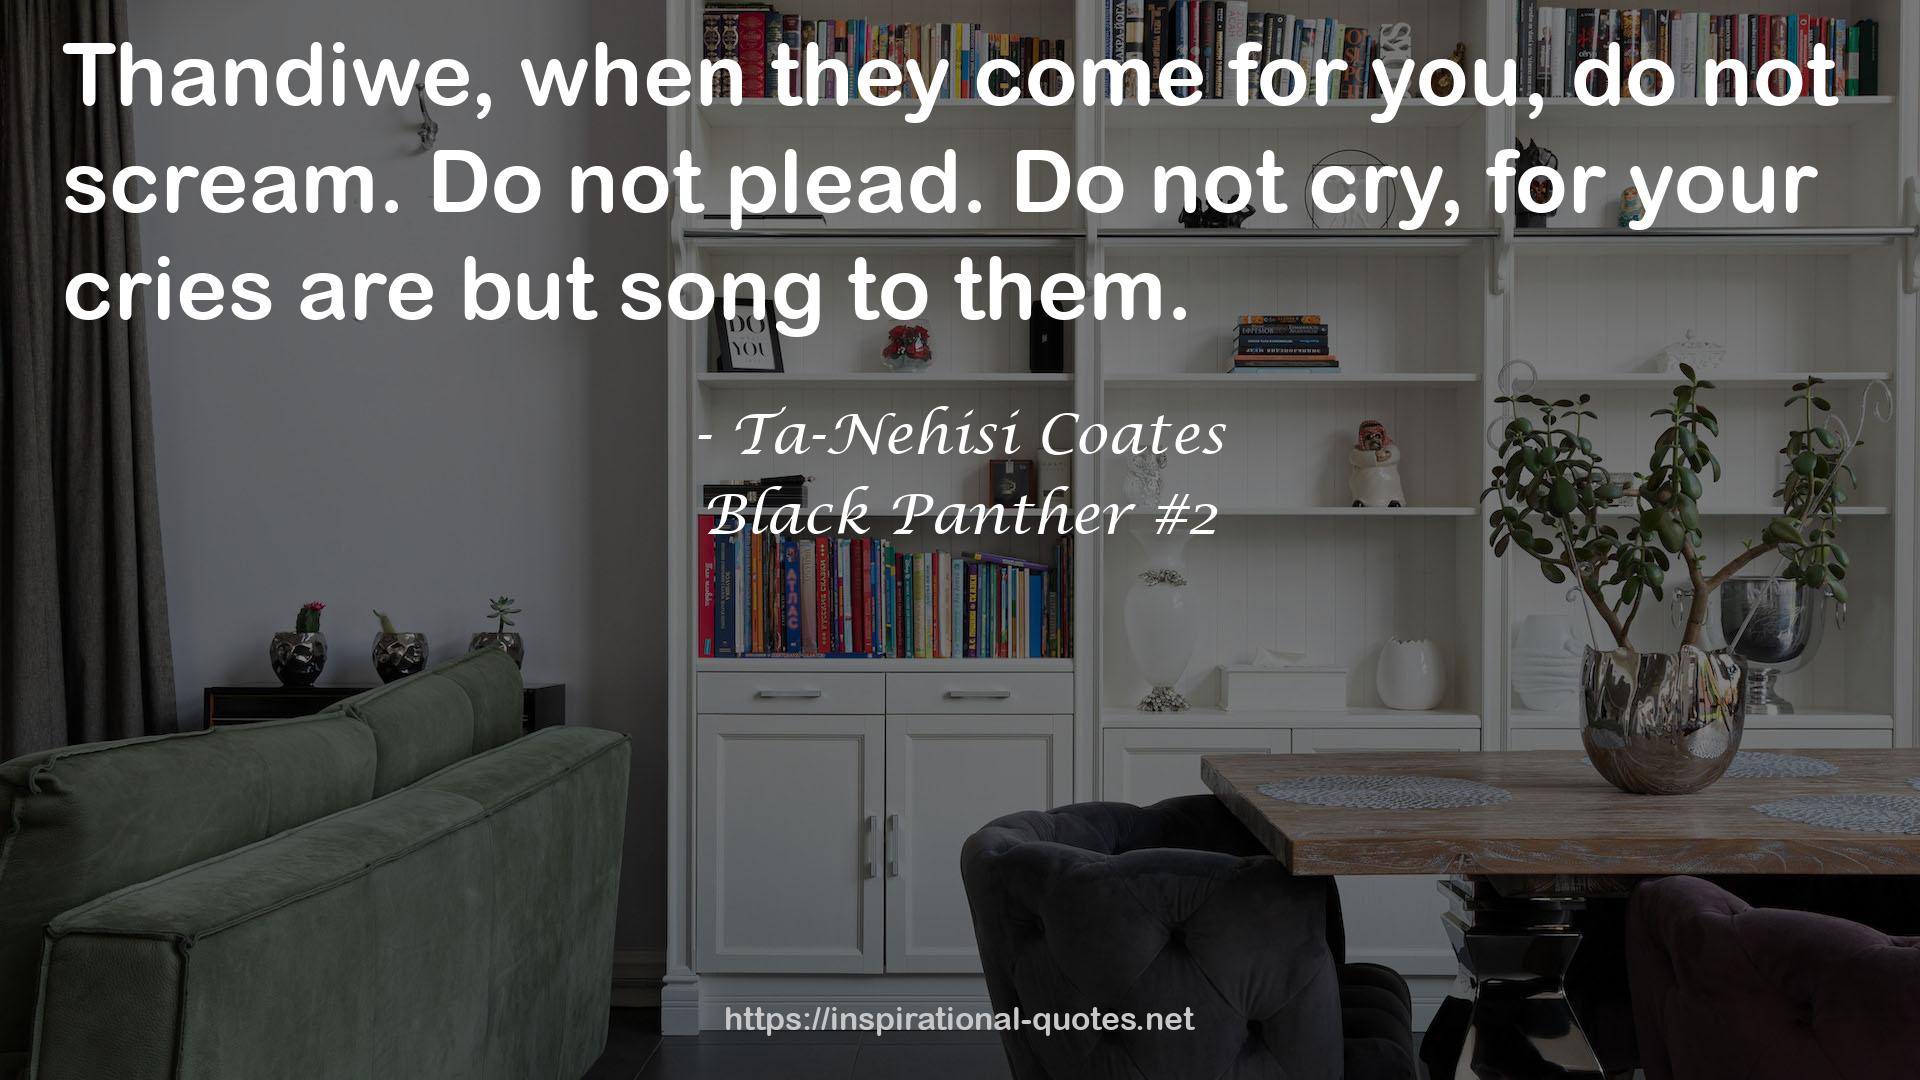 Black Panther #2 QUOTES